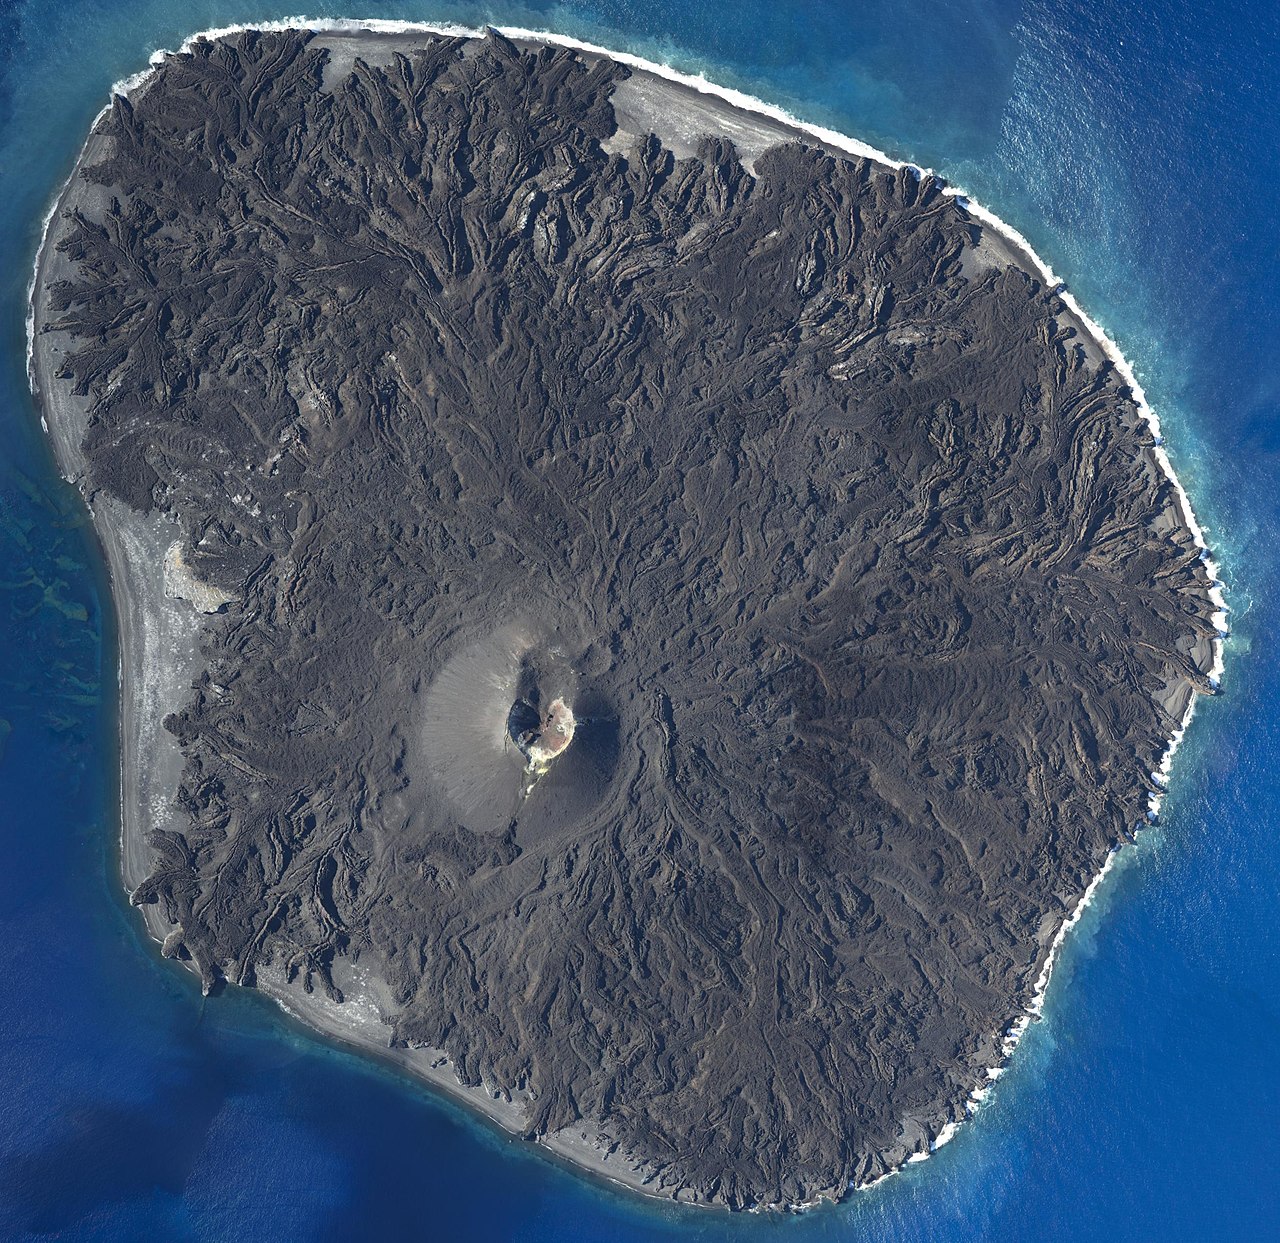 A 2015 eruption buried much of this island under lava; only a small portion of the west coast of this Volcano Islands island isn't covered by recent lava flows.  Image:  Geospatial Information Authority of Japan 